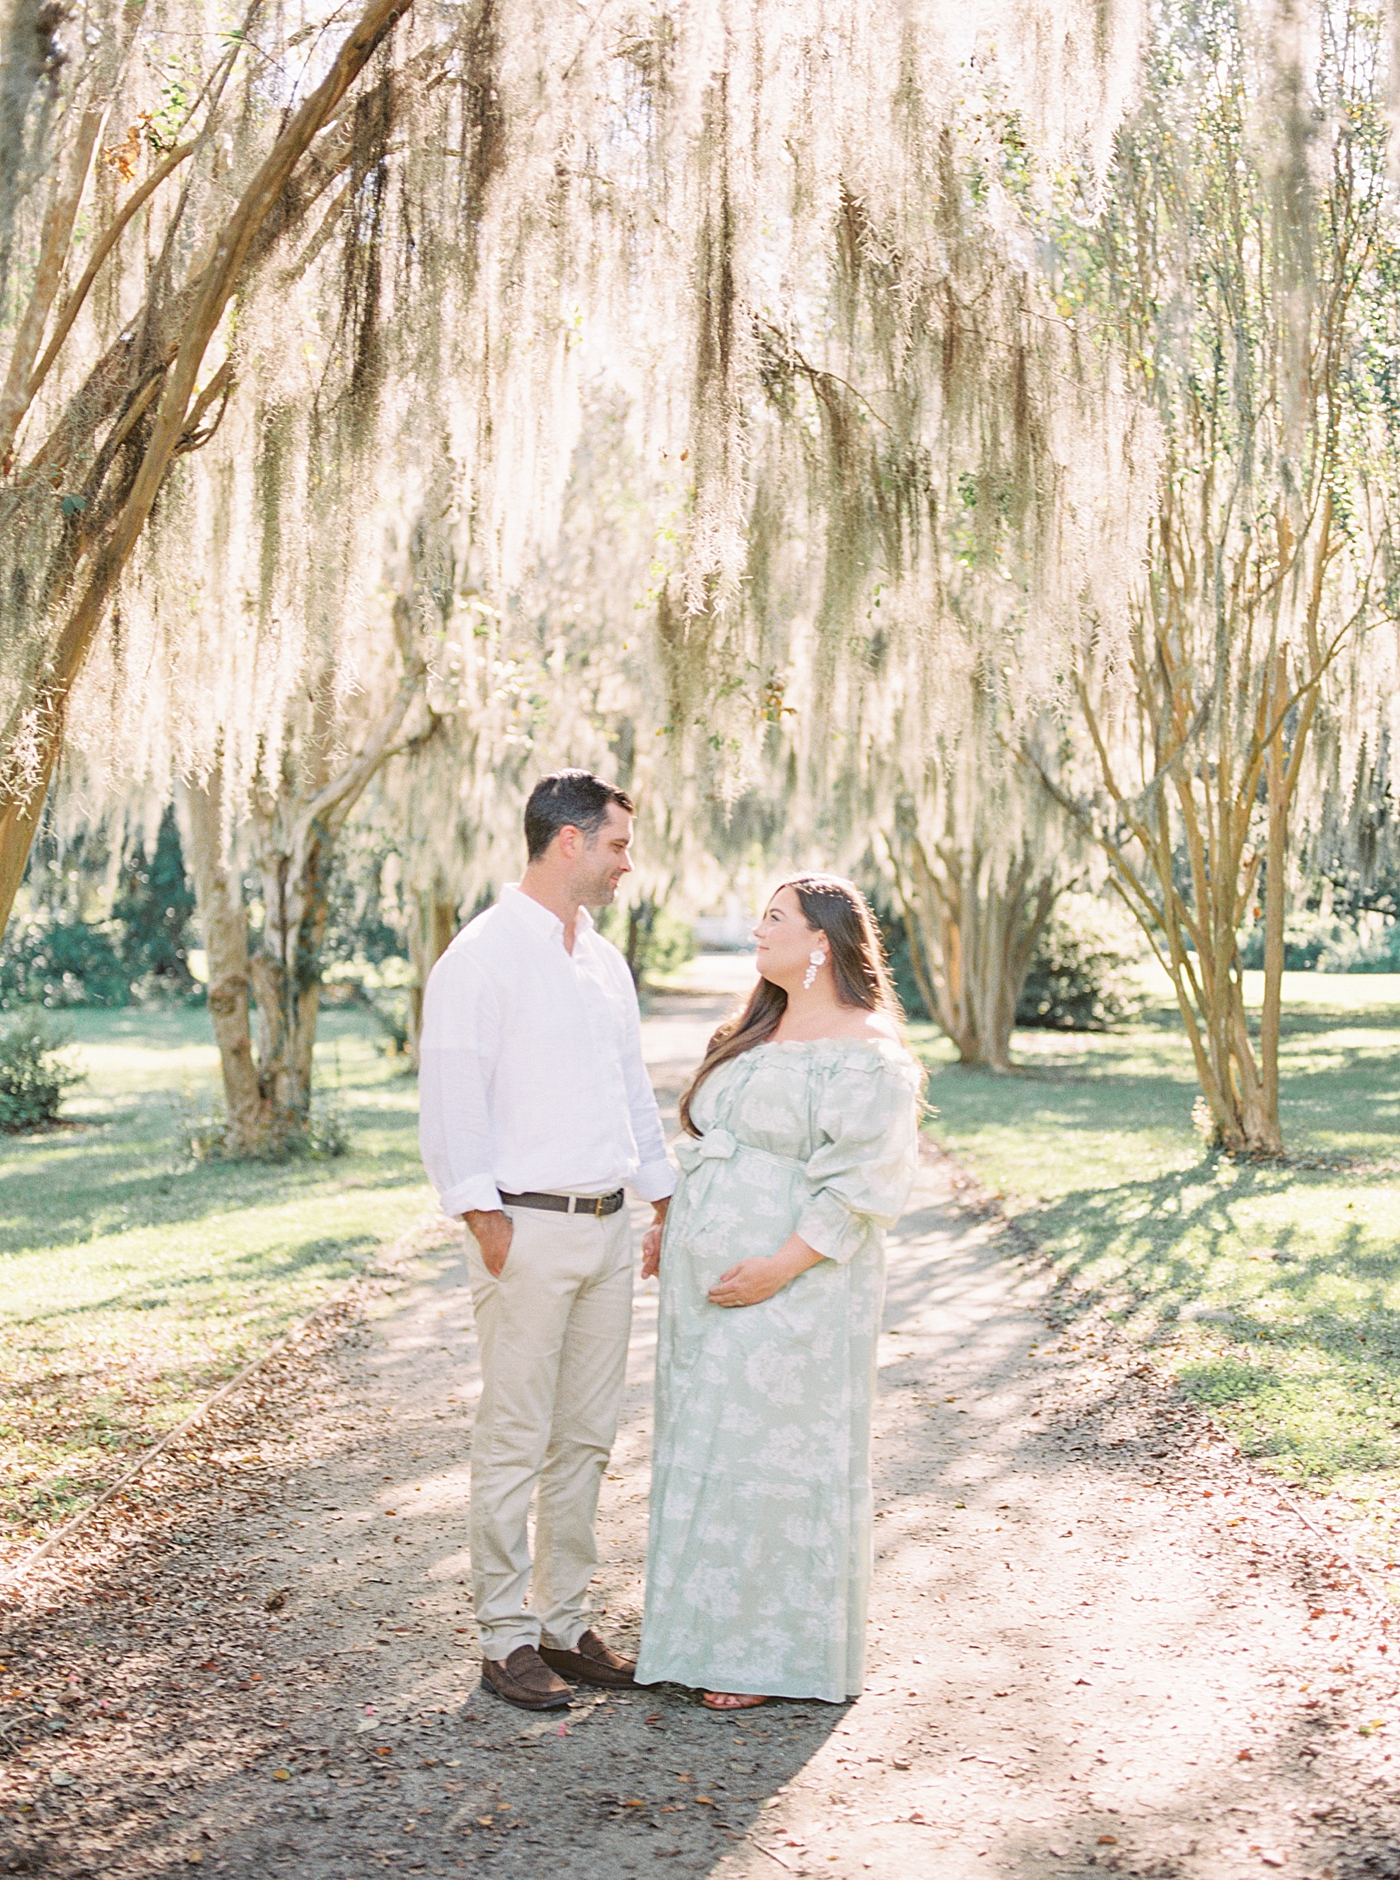 Expecting mother and husband in a green off-the-shoulder spring dress looking at each other while she is holding her pregnant belly on a tree-lined path during Spring Babymoon in Charleston | Image by Caitlyn Motycka 